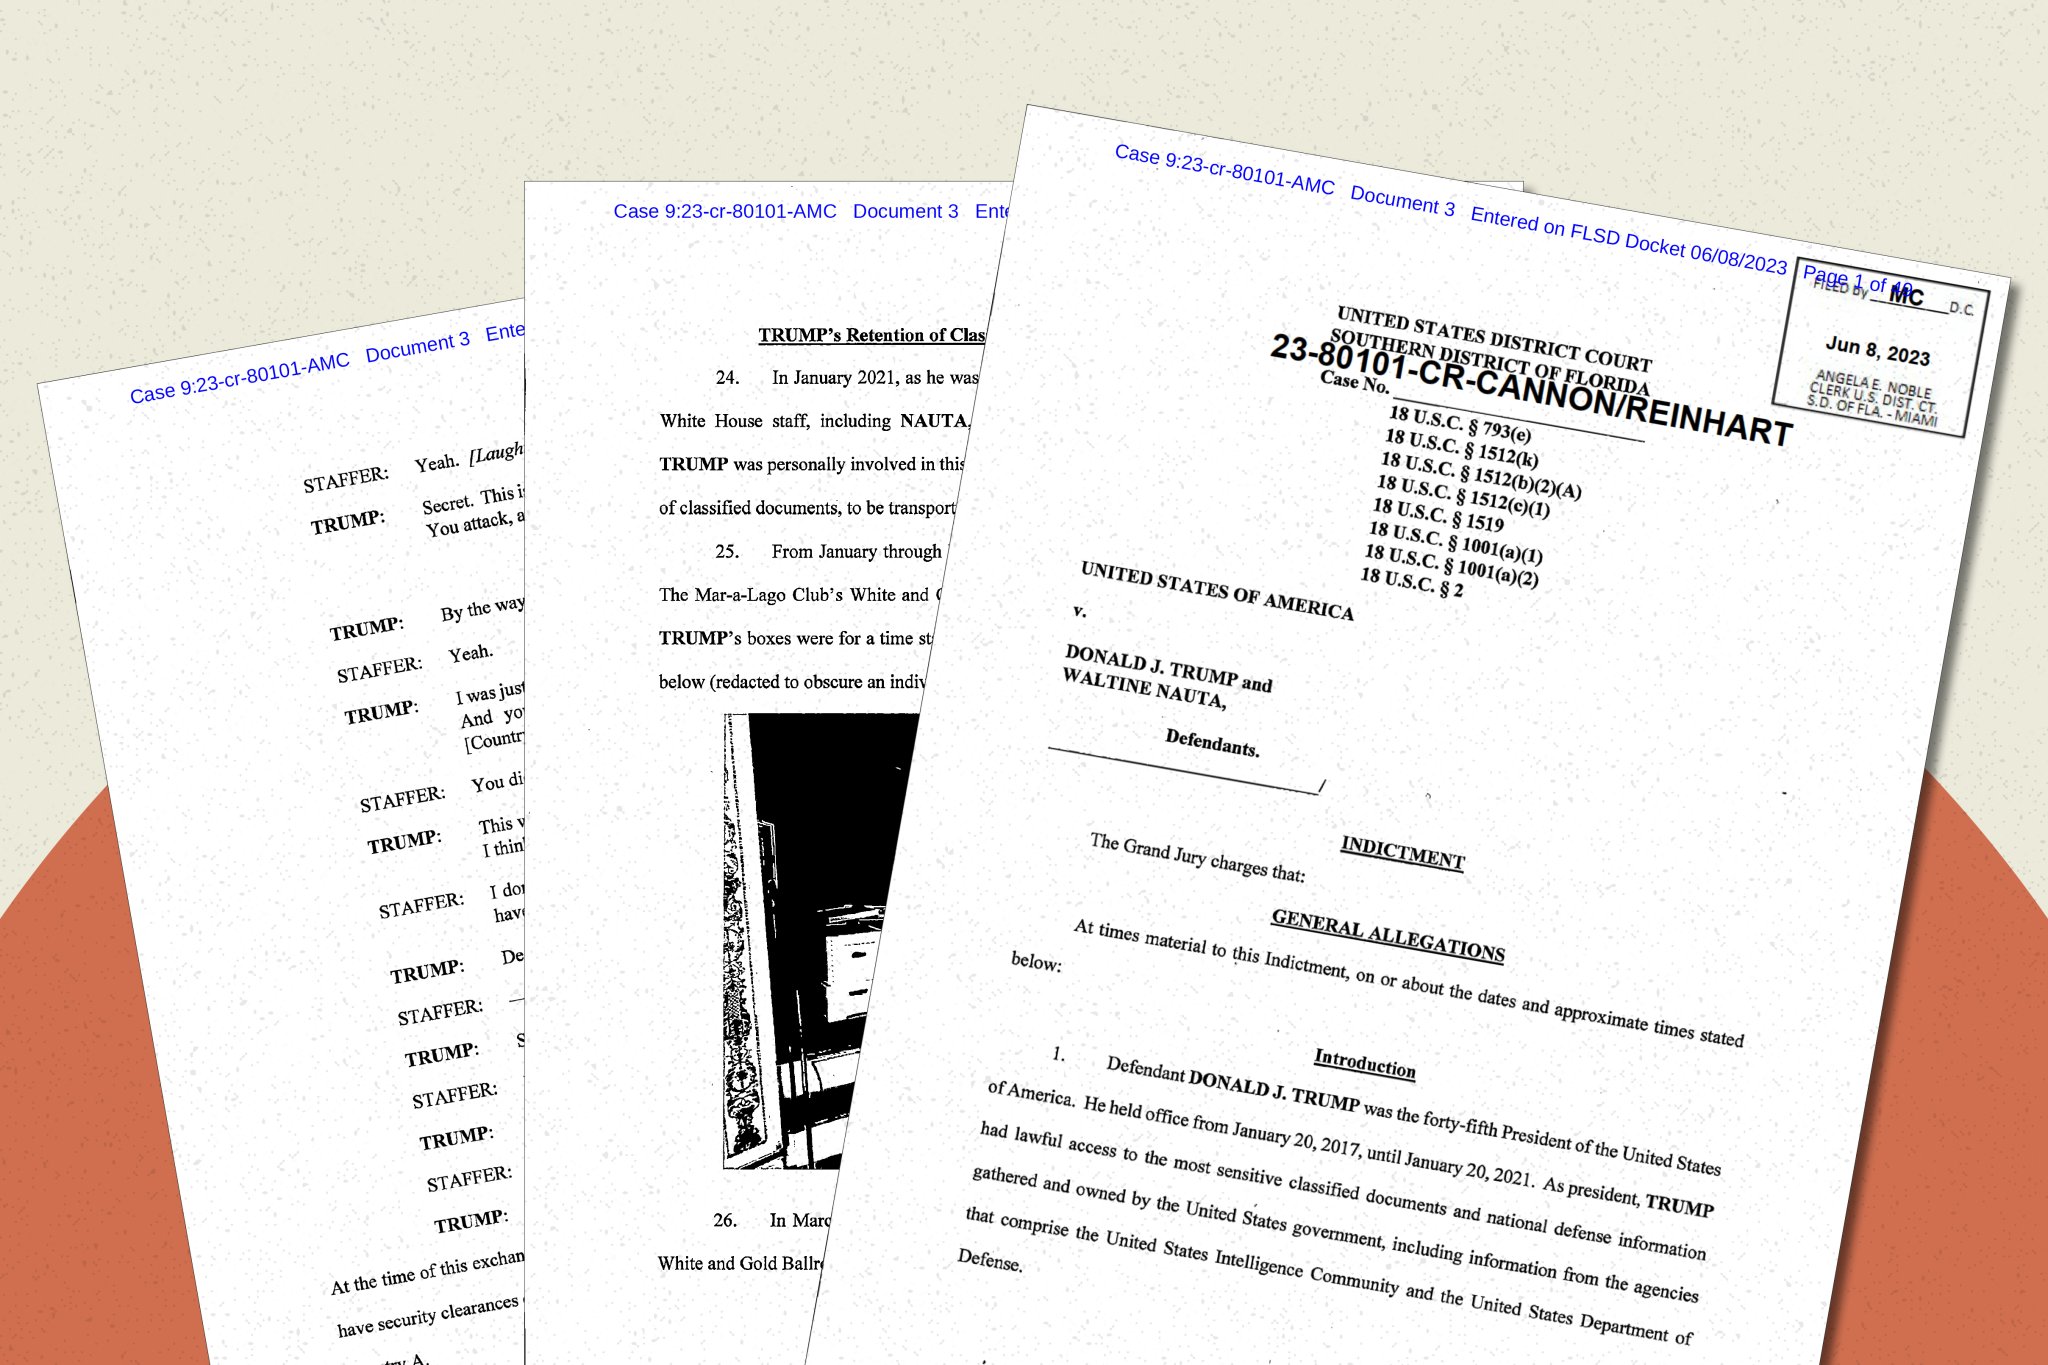 Trump's 2nd indictment: Read the full document text